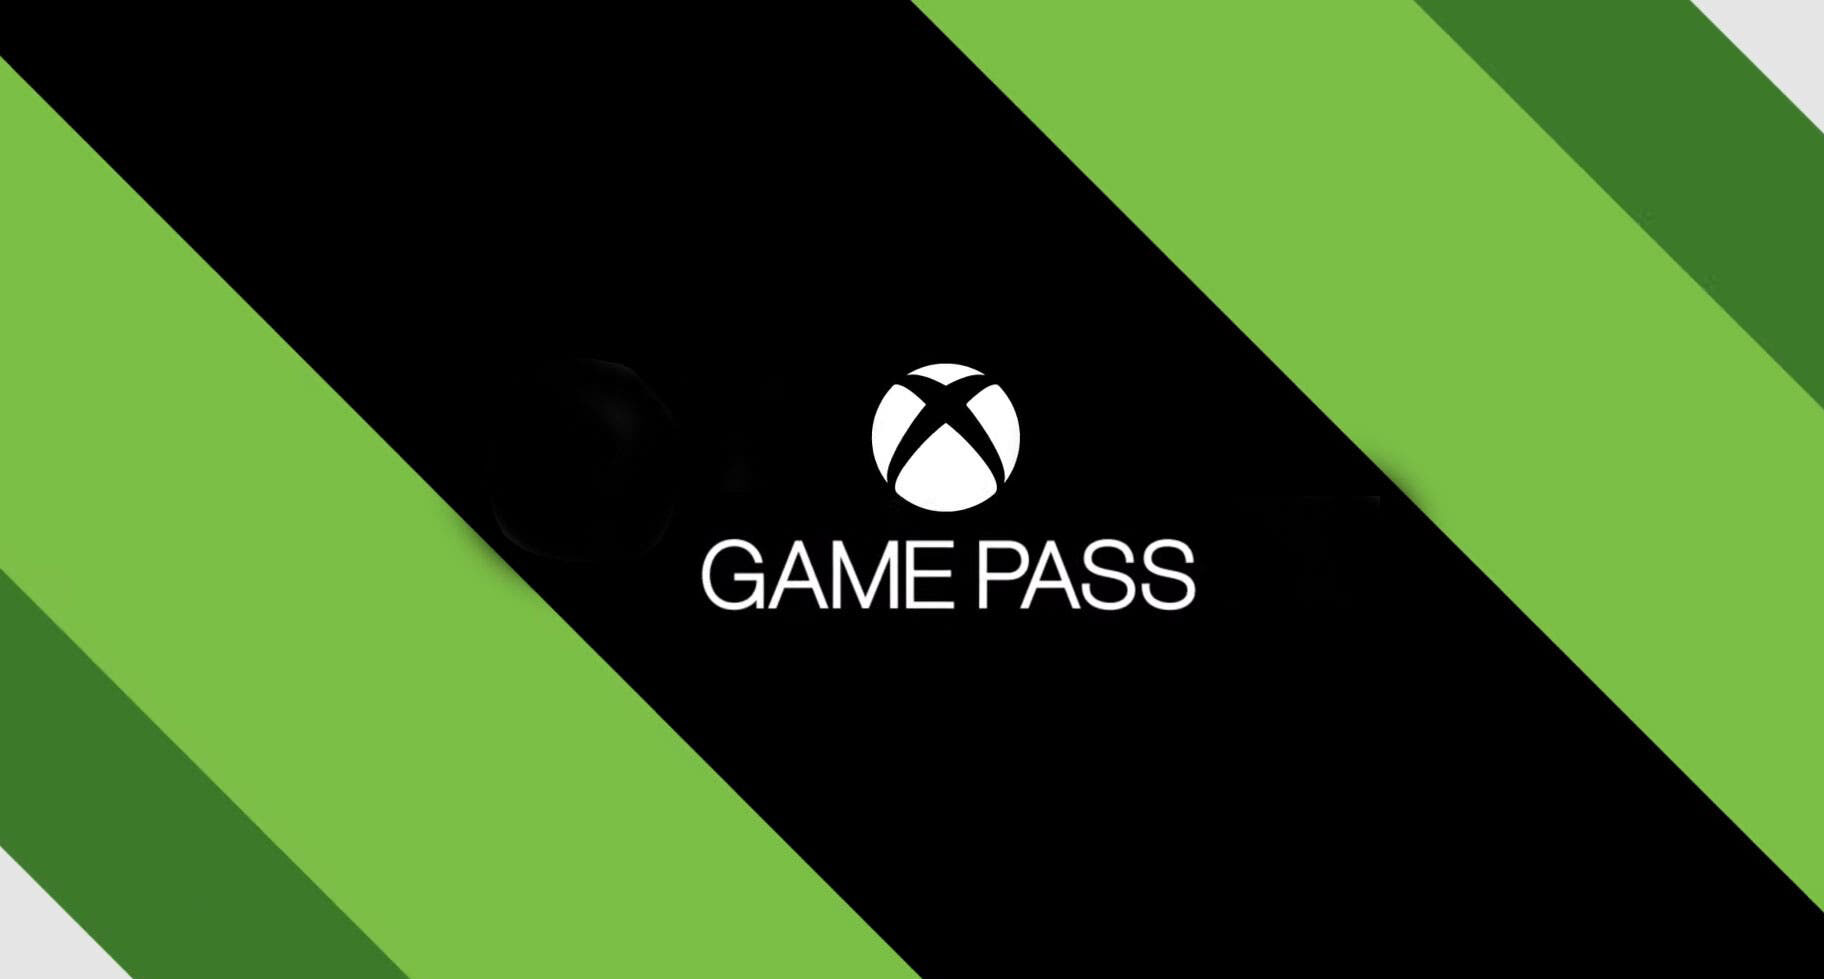 1000+ games have already passed through Game Pass, half of them are no longer playable